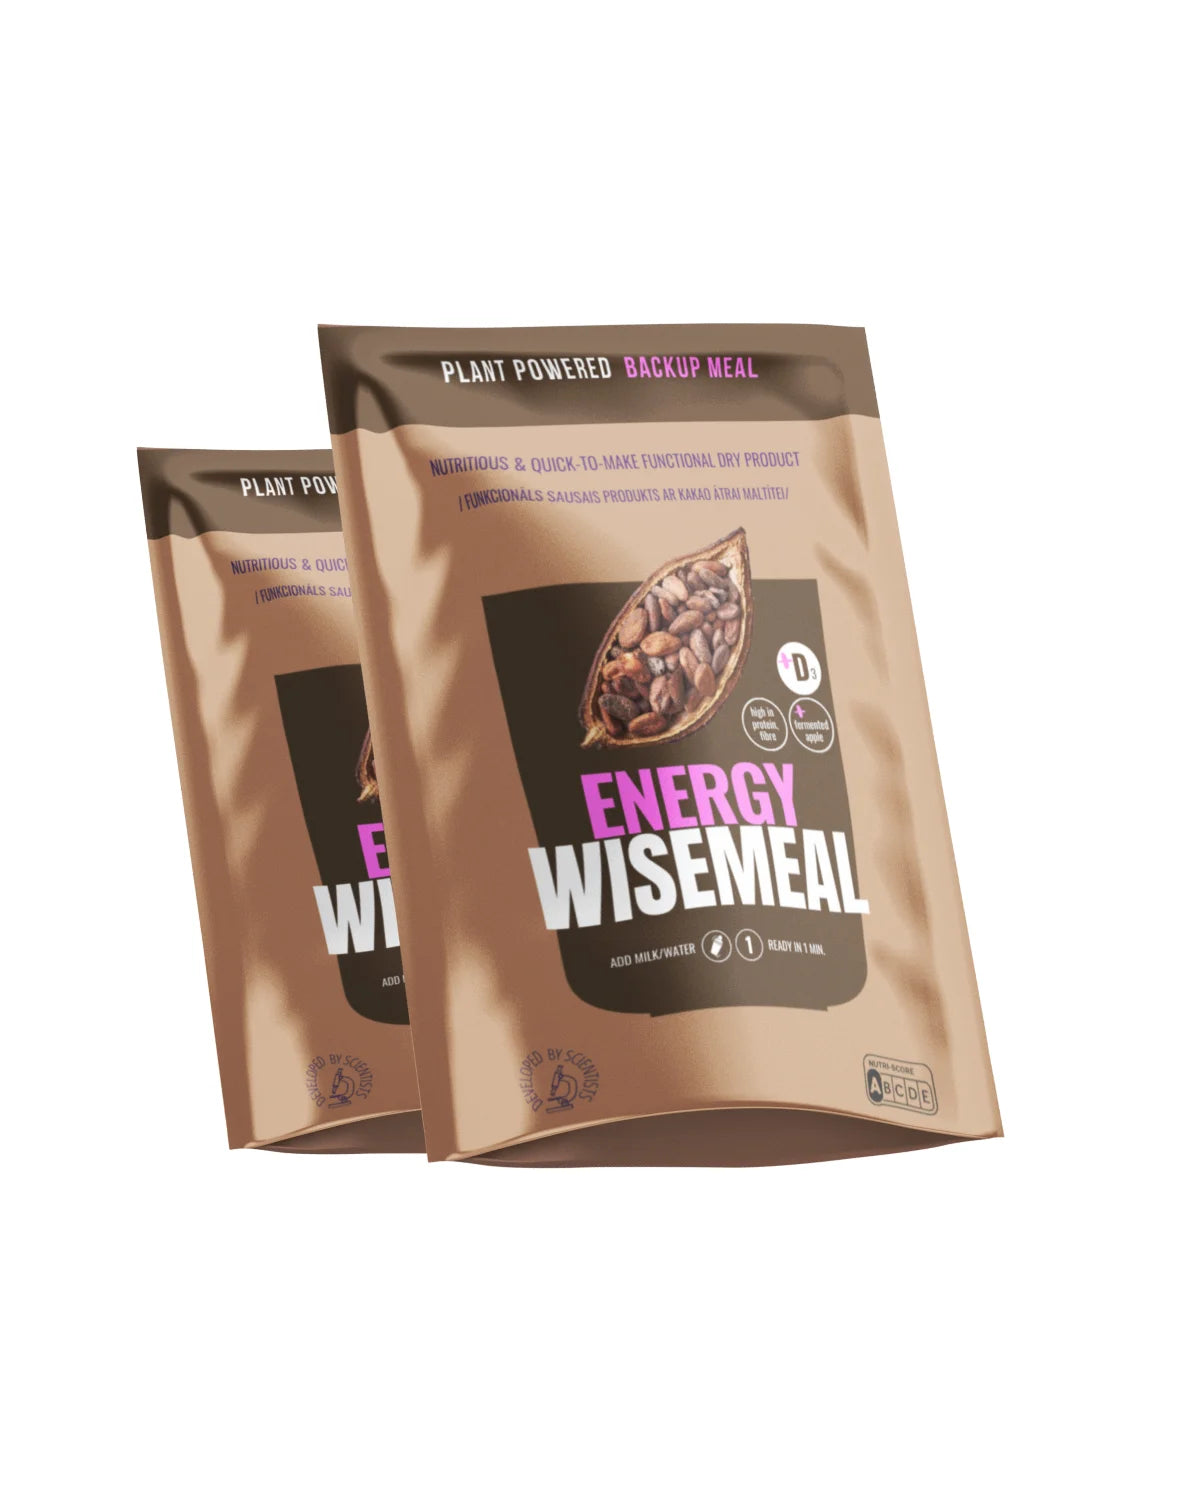 "Energy" WISEMEAL with cacao for protein rich smothy